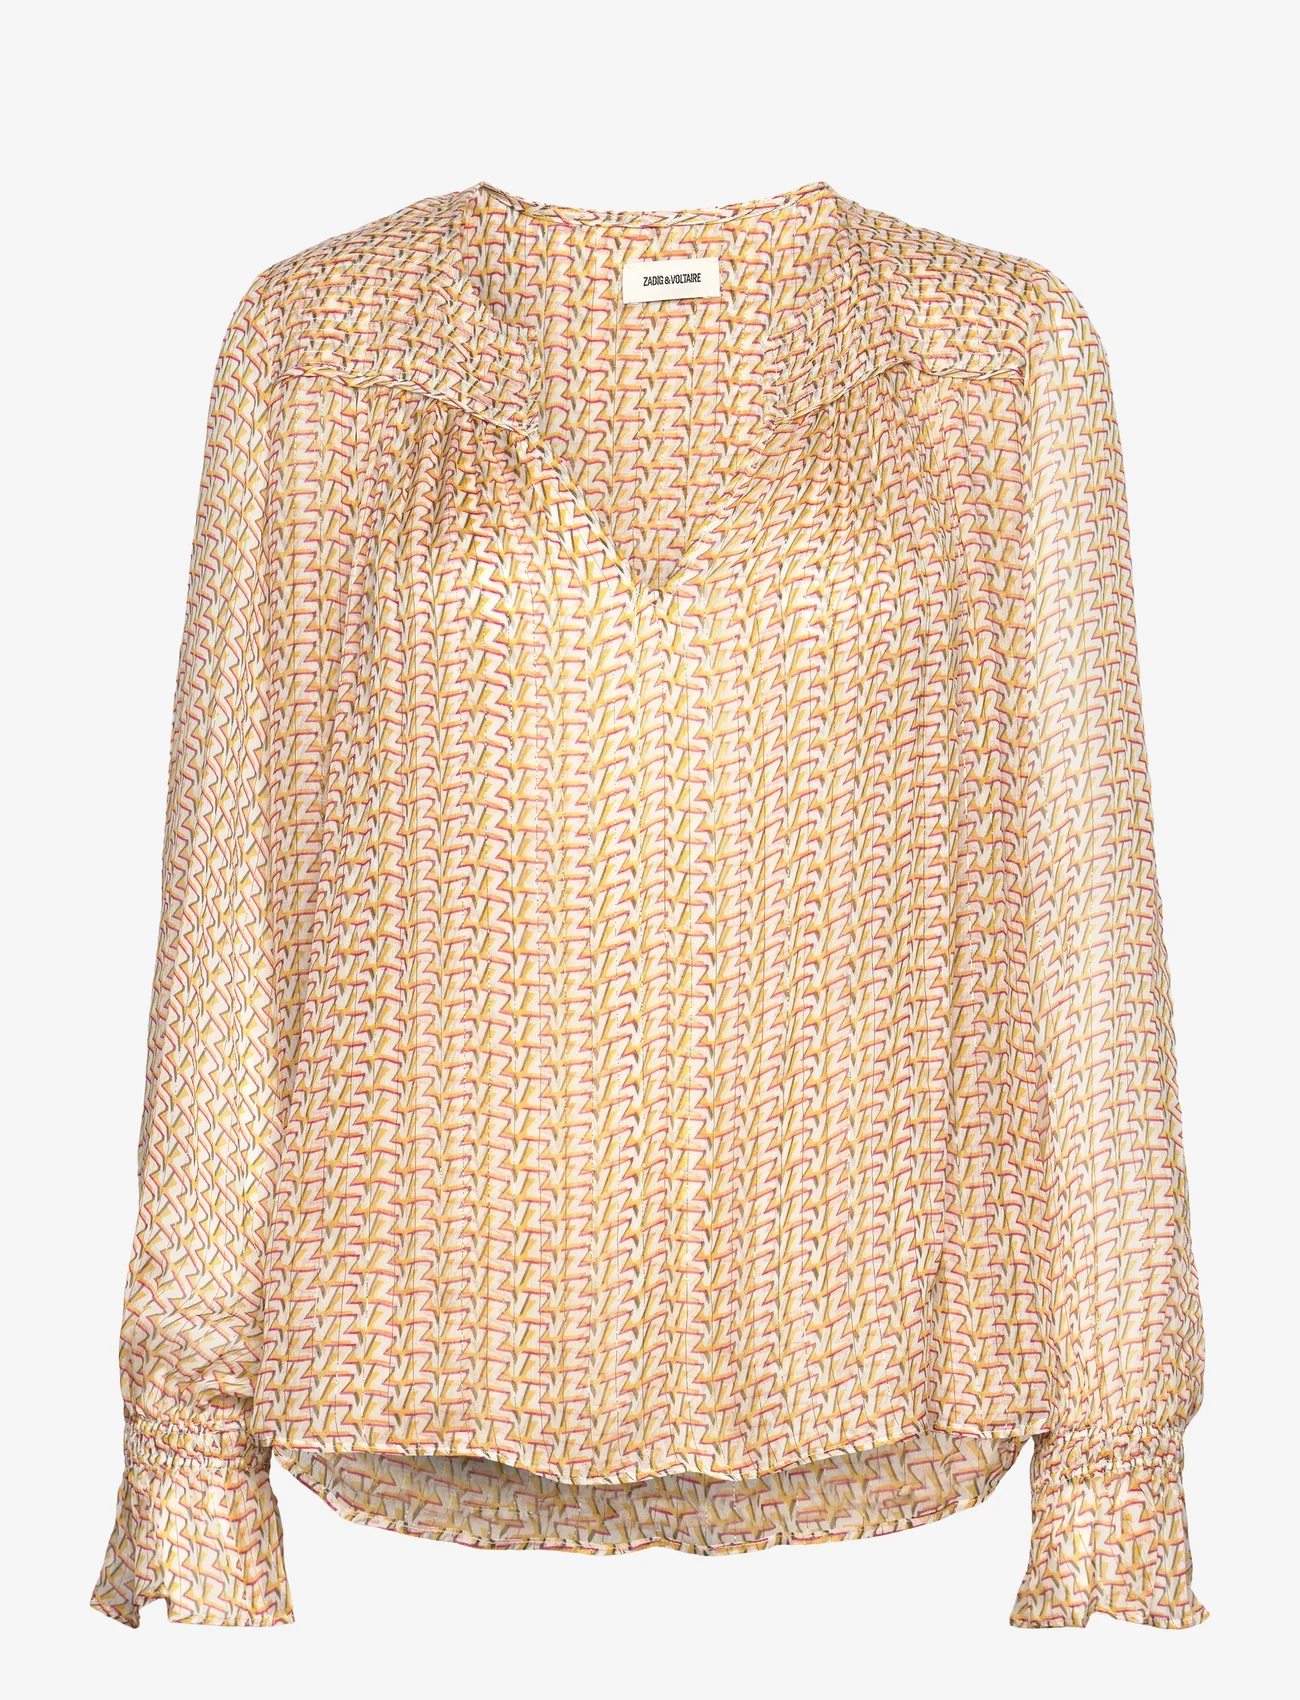 Zadig & Voltaire - TAYA MOUSSELINE ZV - long-sleeved blouses - buttercup - 0